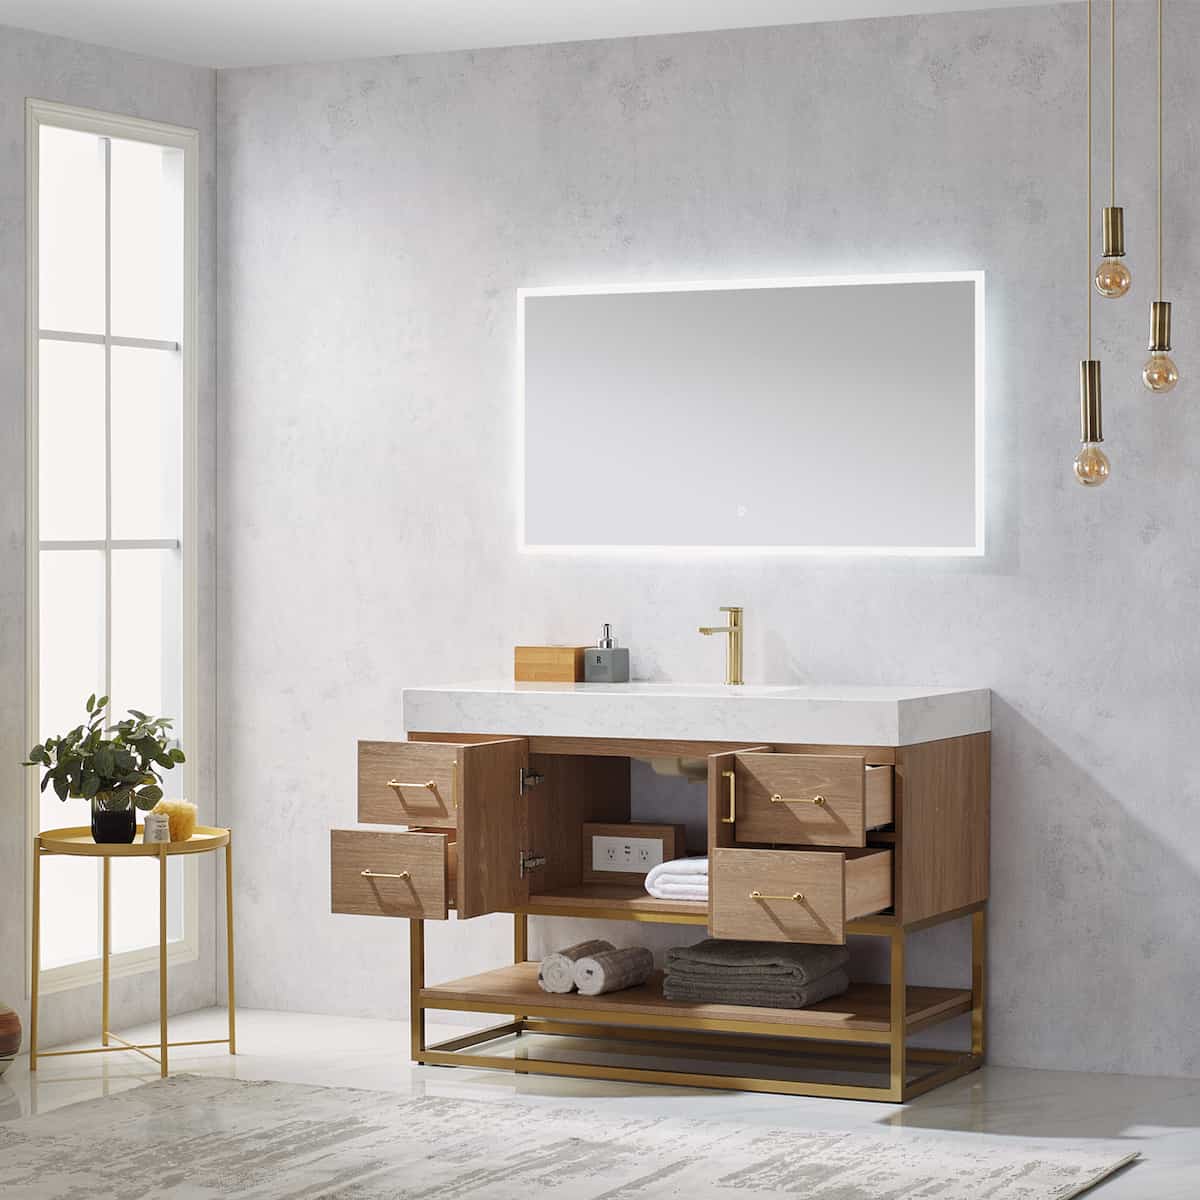 Vinnova Alistair 48 Inch Freestanding Single Vanity in North American Oak and Brushed Gold Frame with White Grain Stone Countertop With Mirror Inside 789048-NO-GW